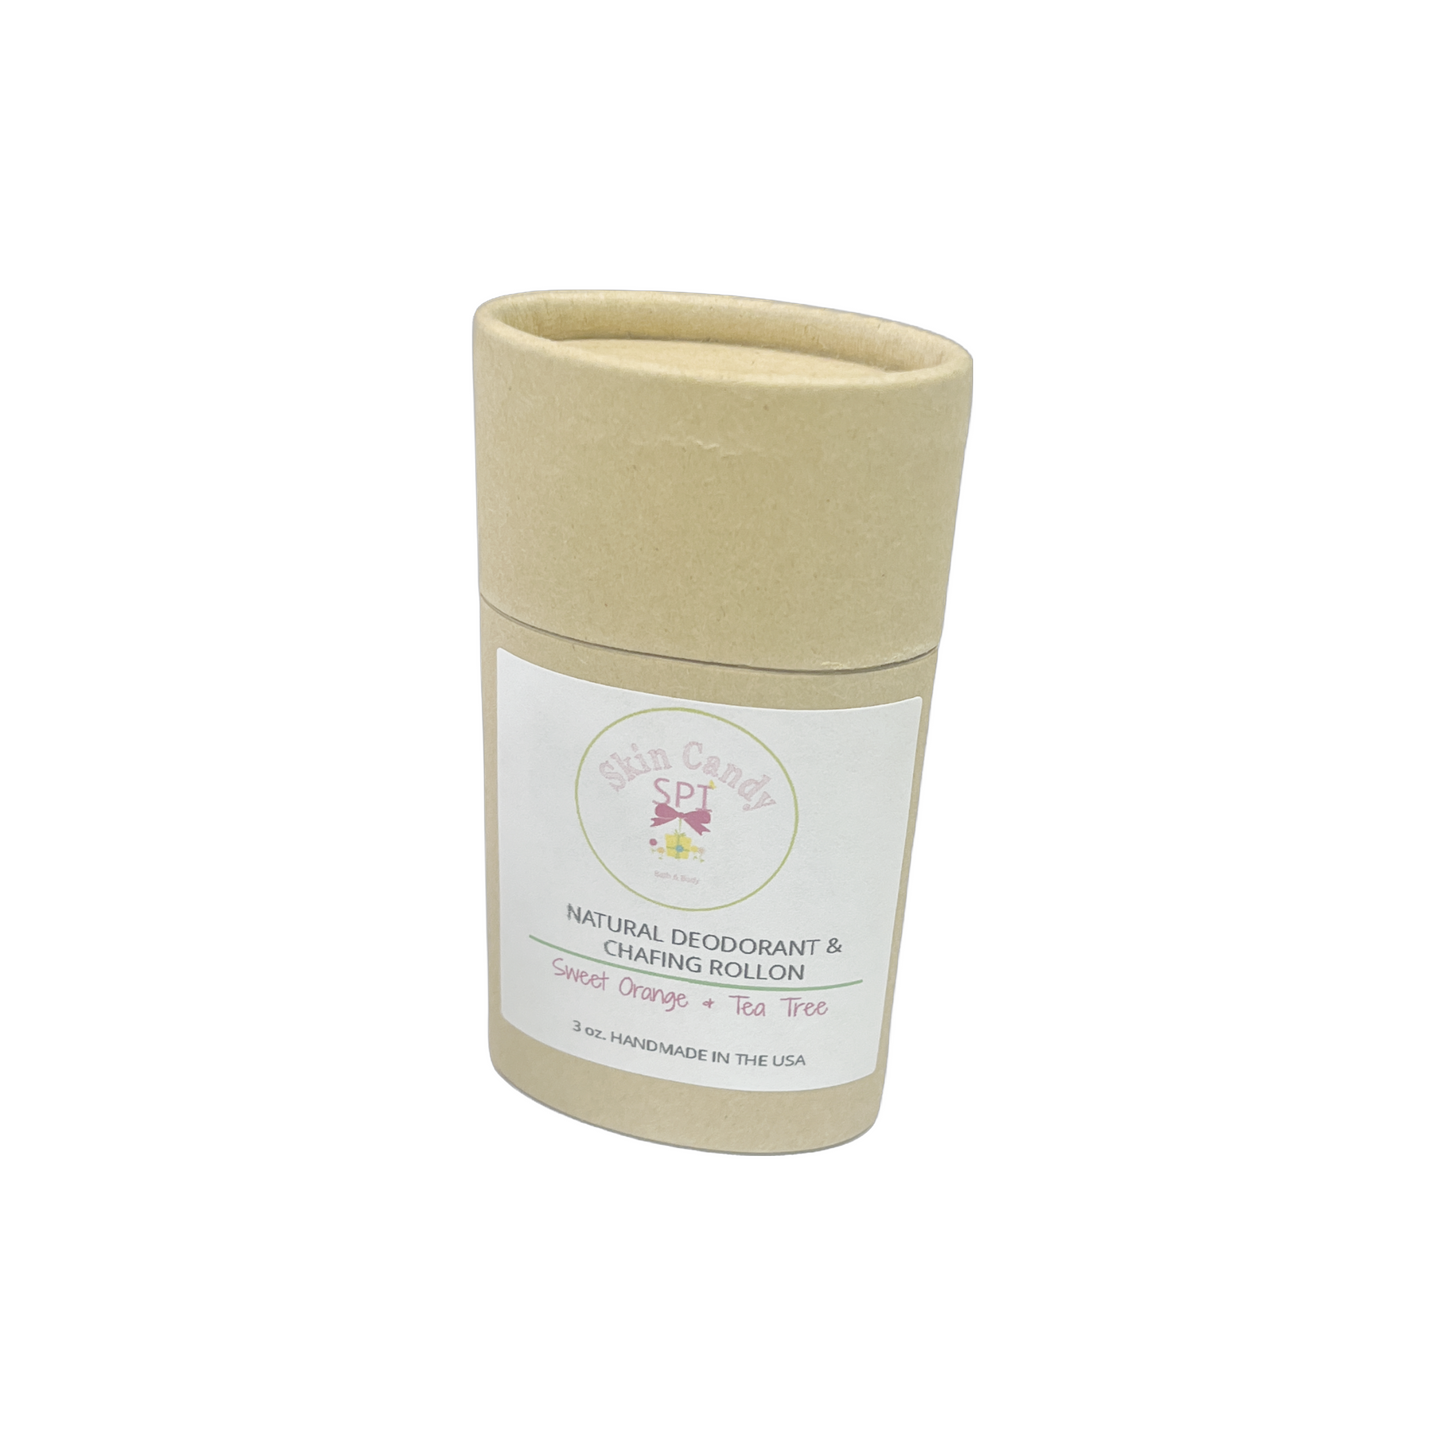 Unveil Freshness Naturally with Our Sweet Orange & Tea Tree Deodorant and Chafing Roll On!